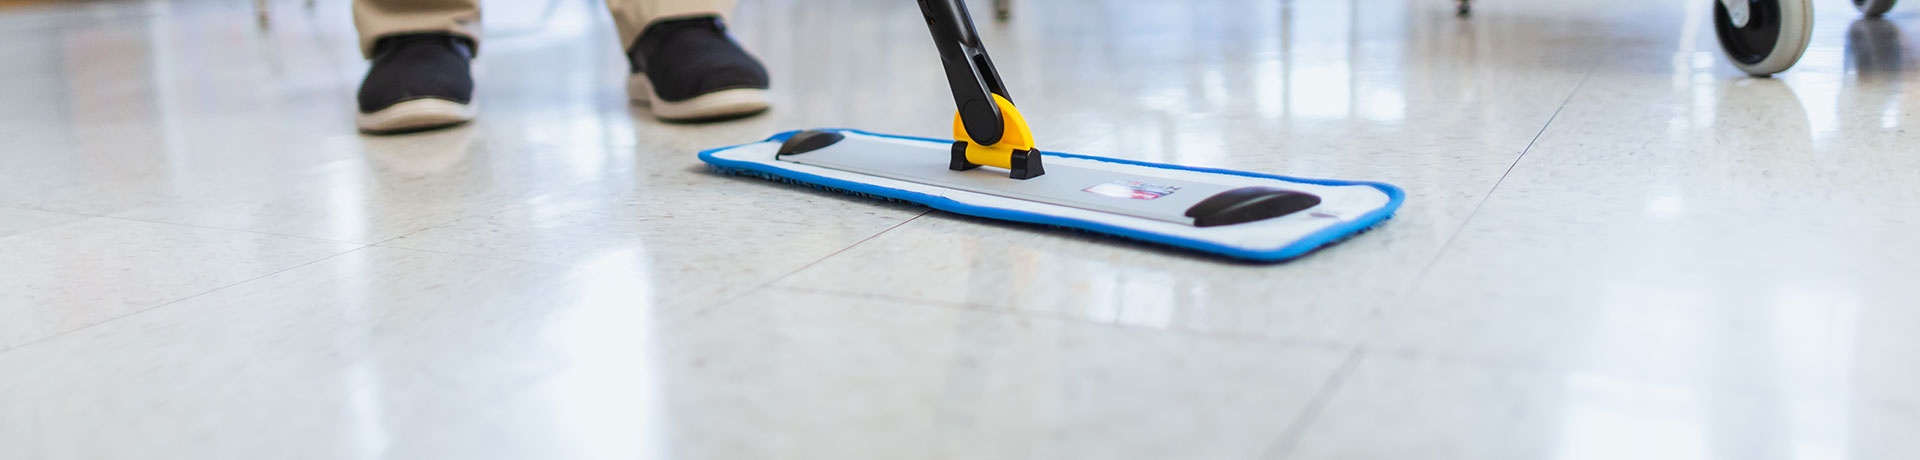 Industrial laminate flooring being wiped clean with a microfiber sweeper